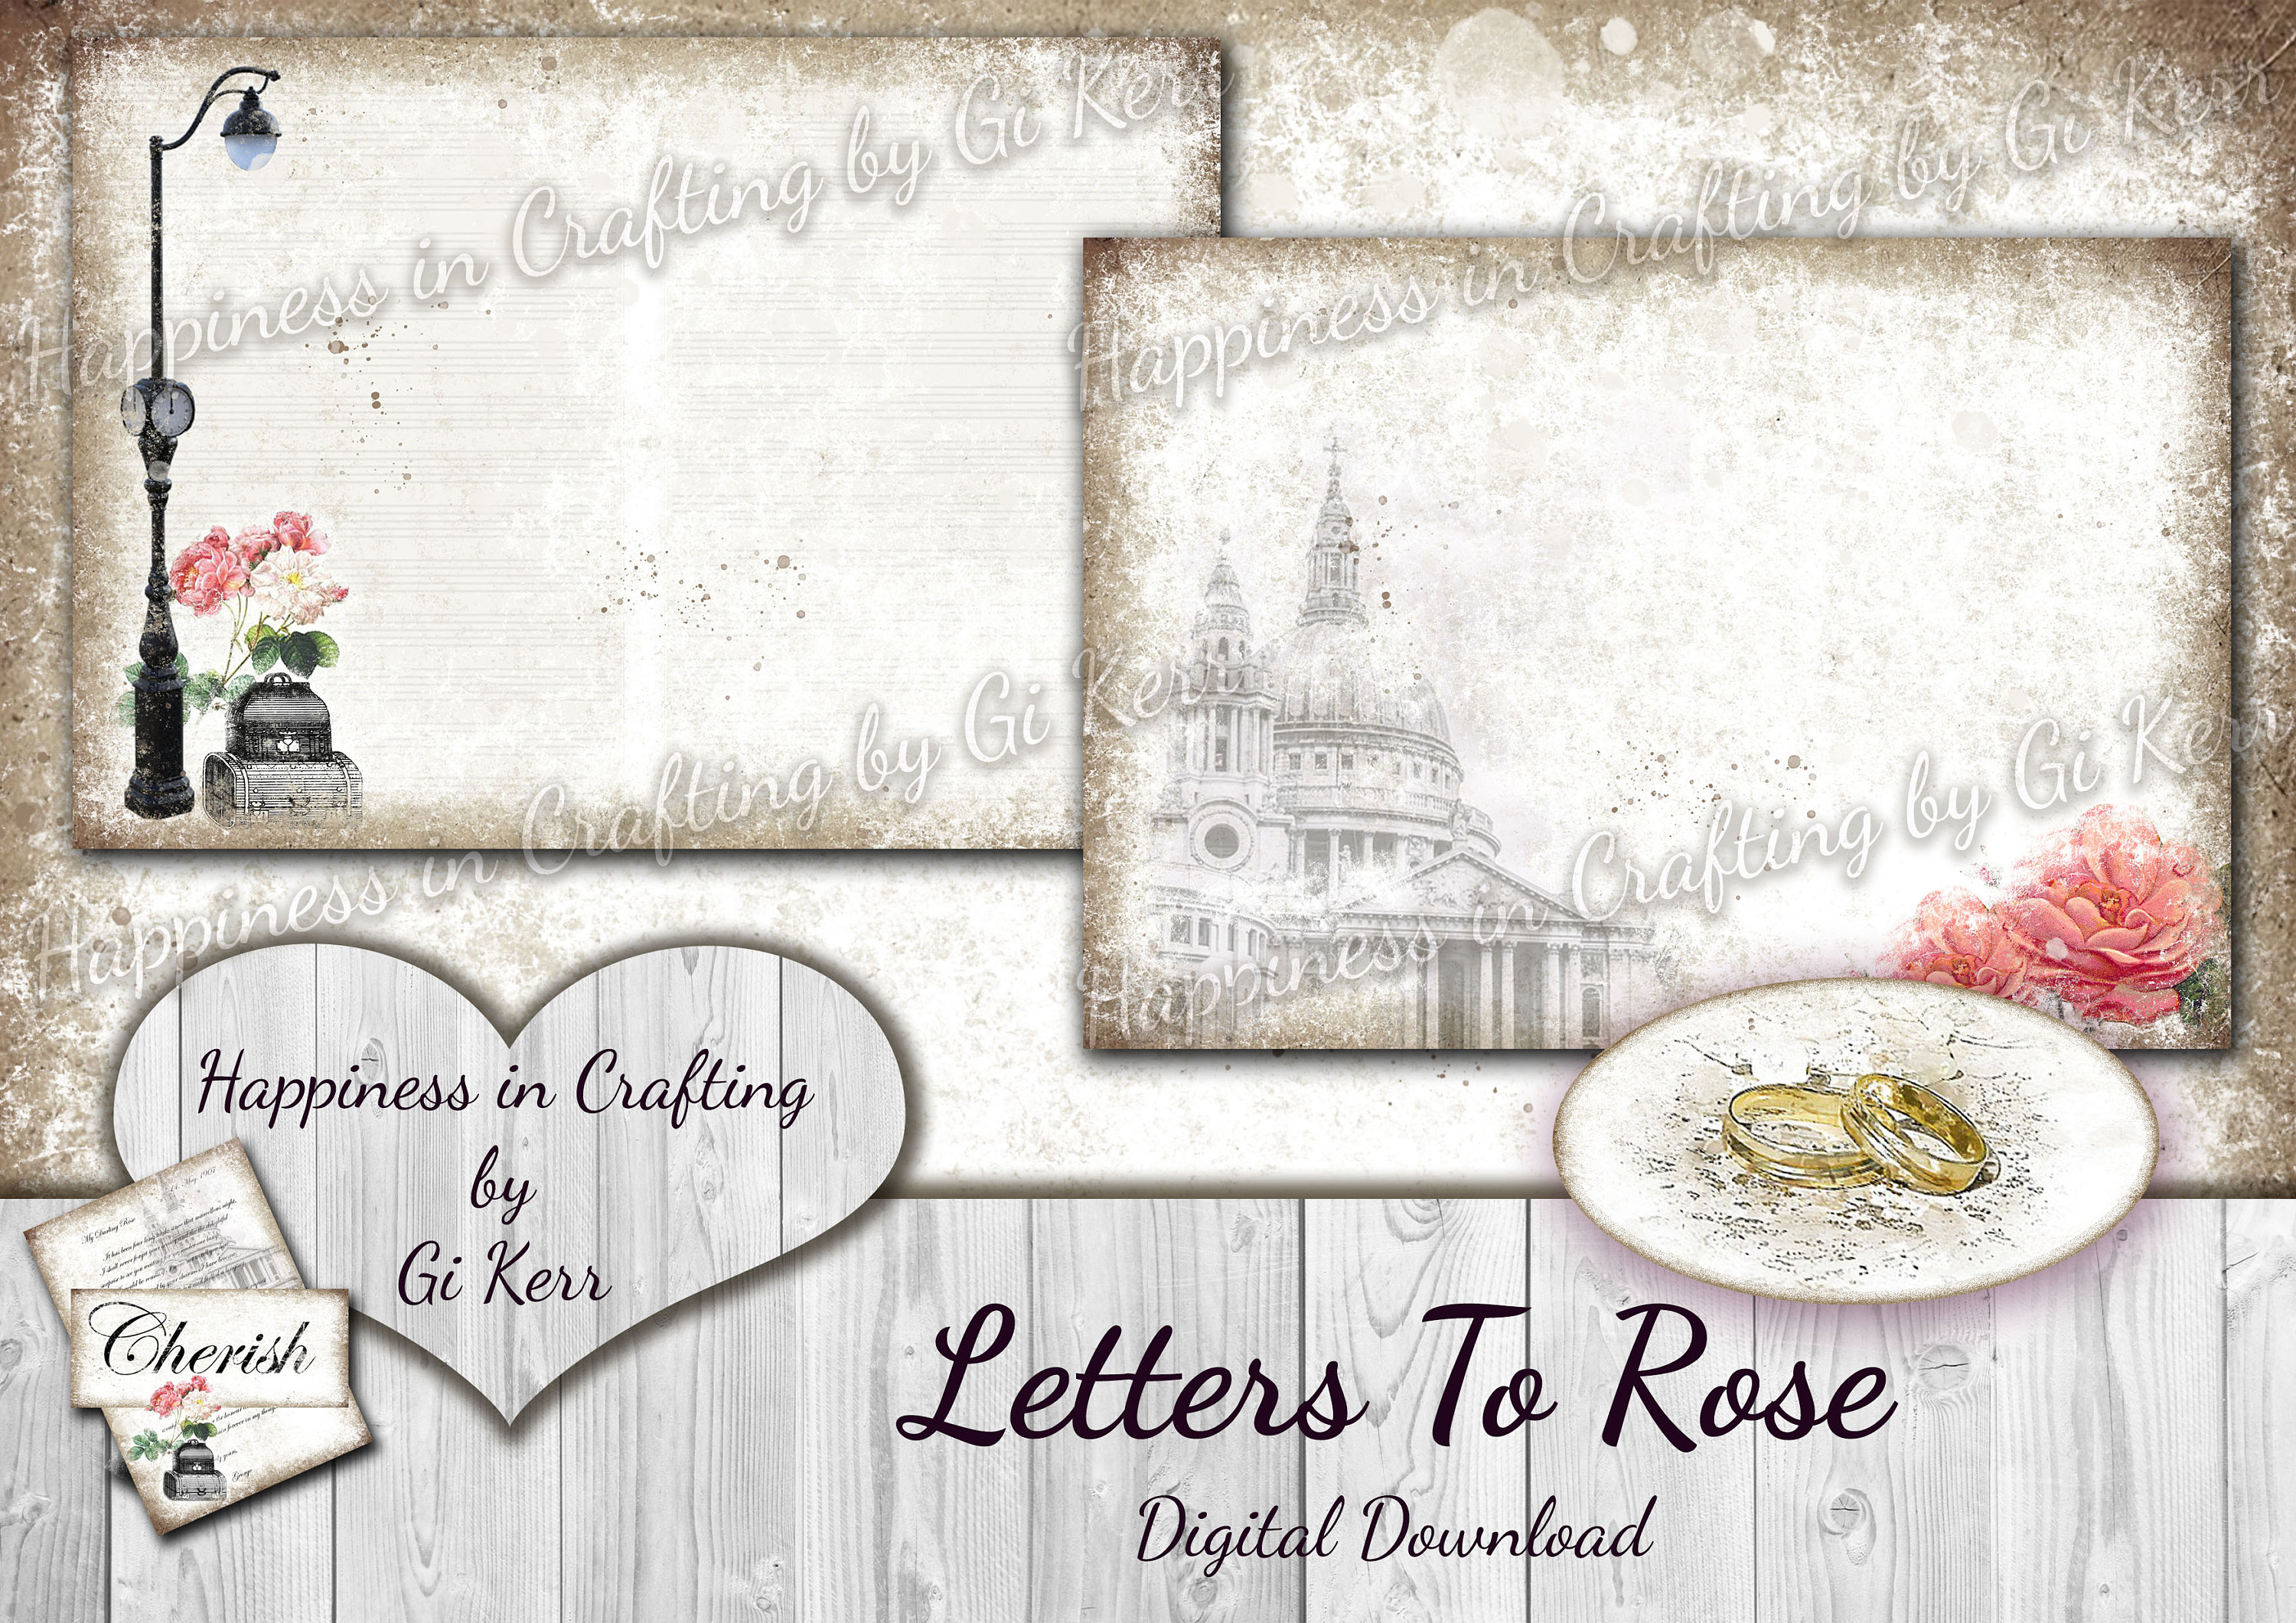 Letters to rose instant digital download printable digital kit for junk journals scrapbooking happiness in crafting gi kerr